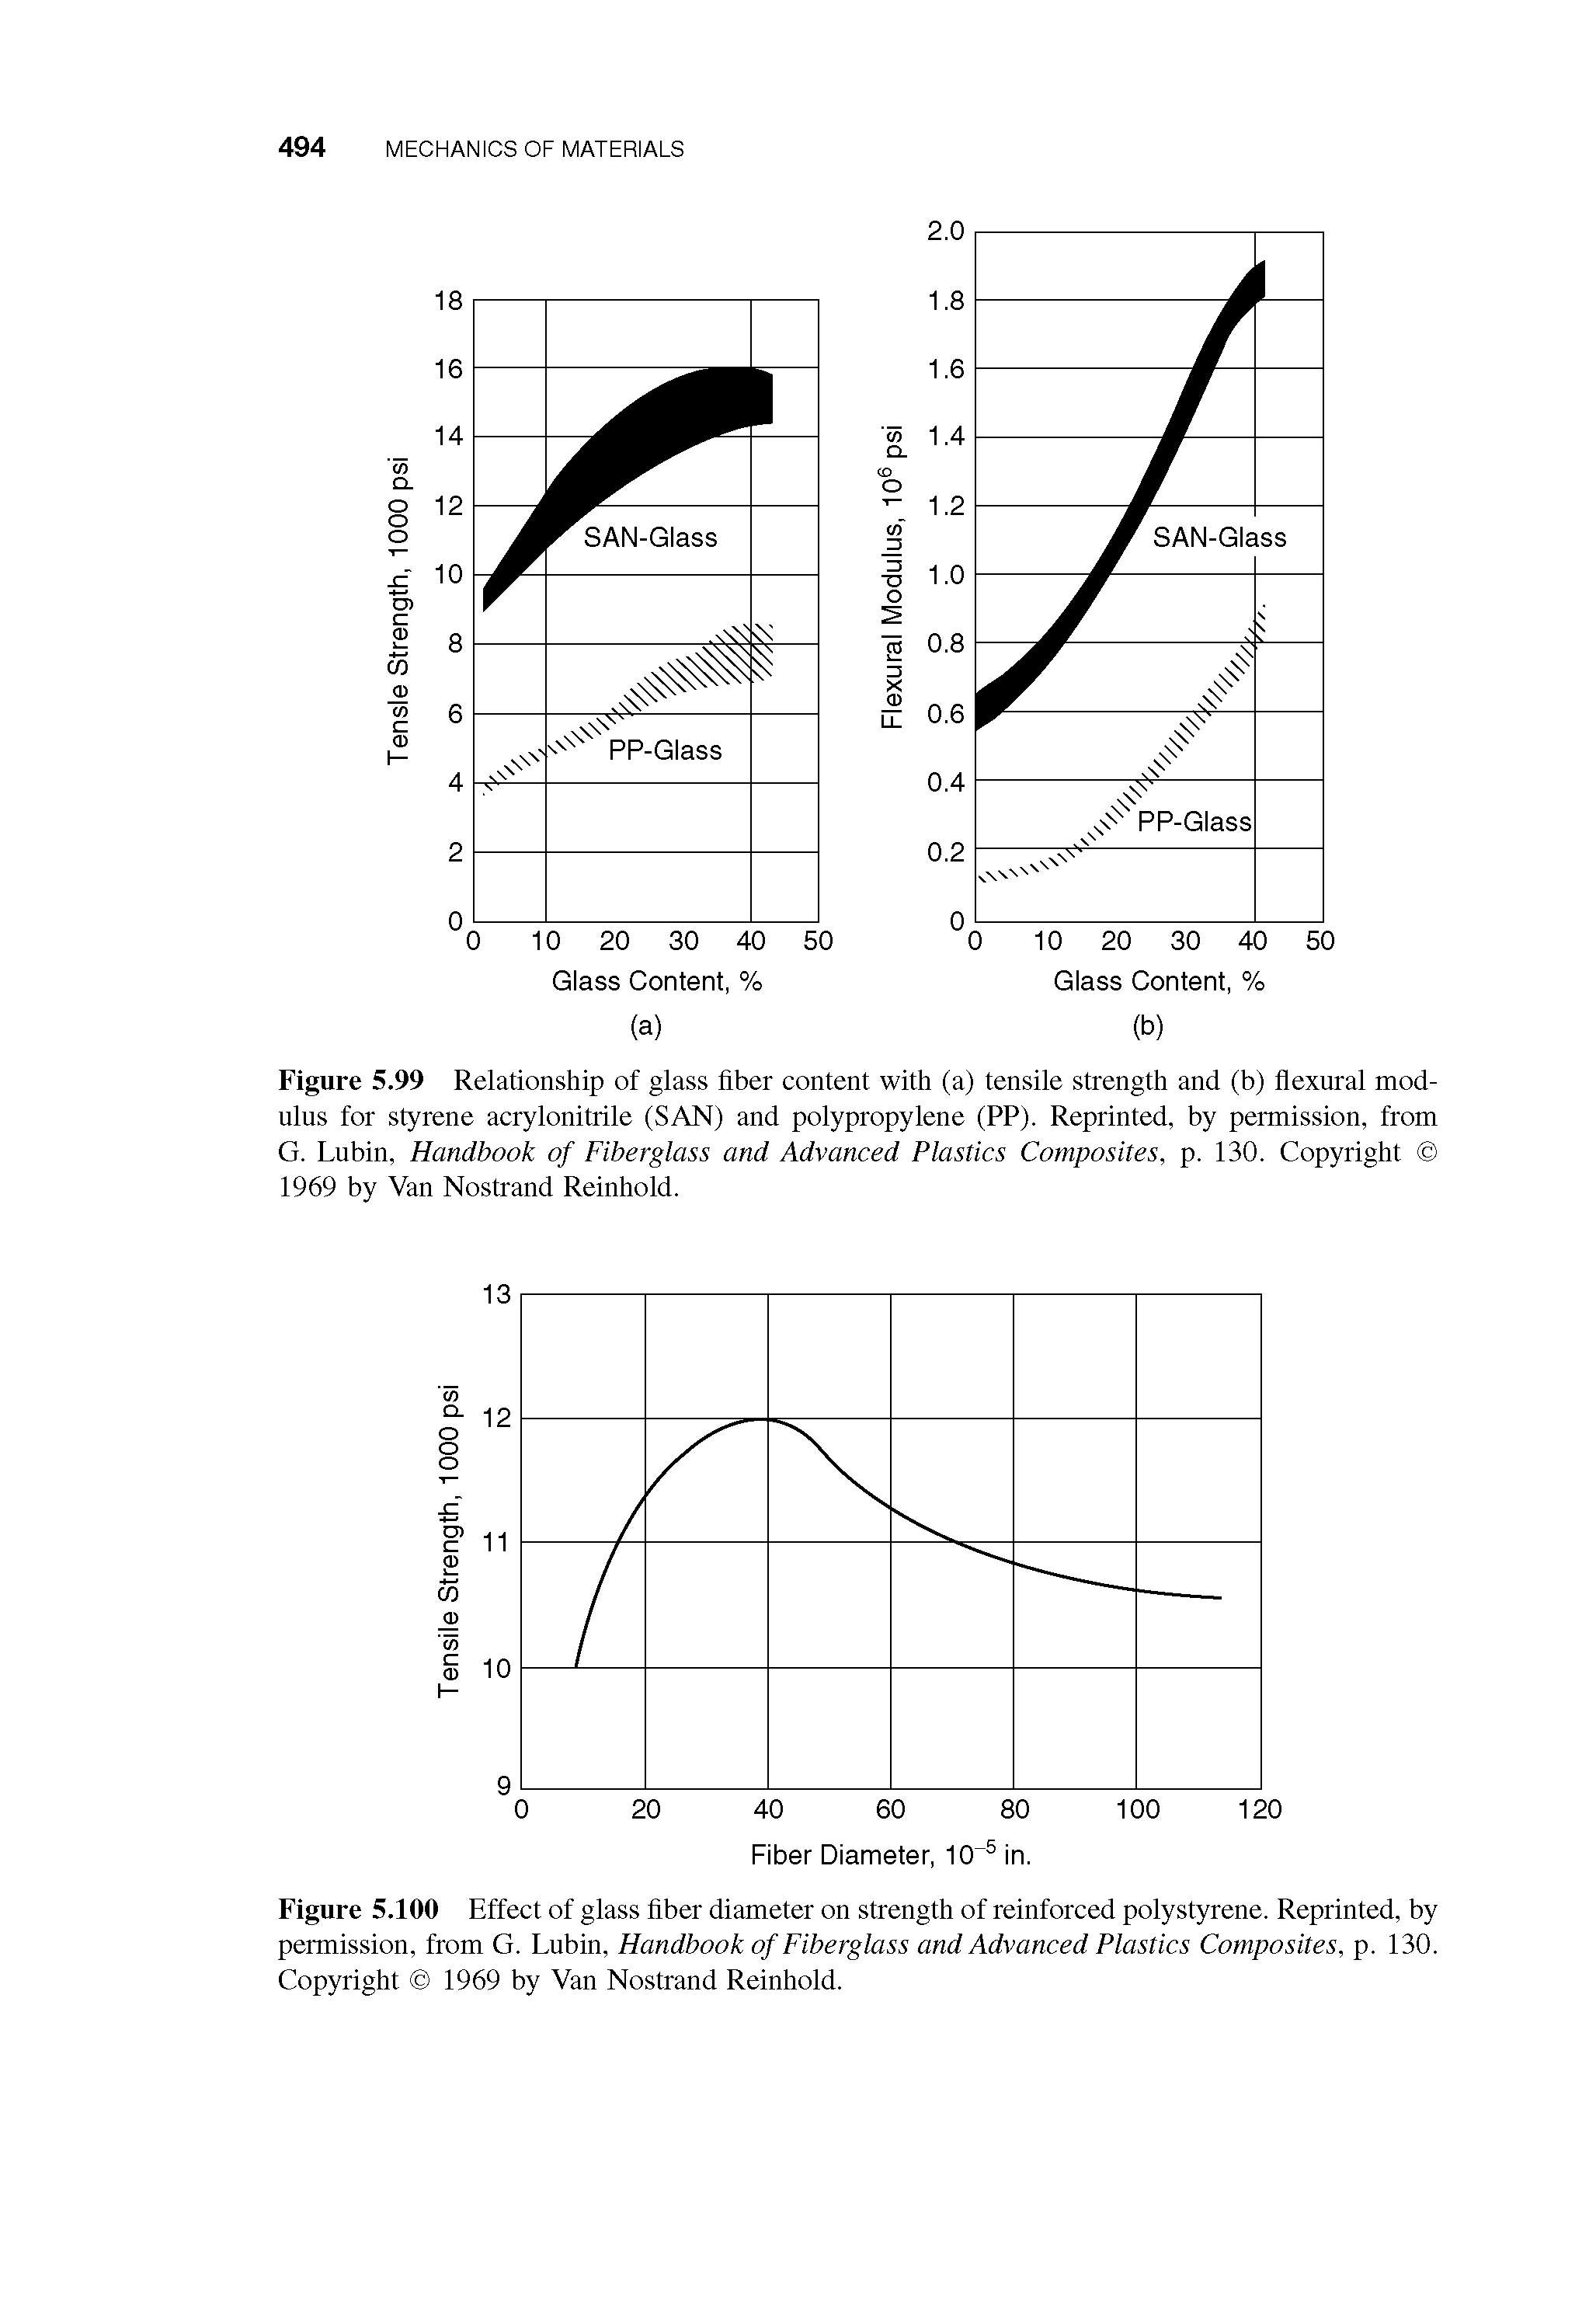 Figure 5.100 Effect of glass fiber diameter on strength of reinforced polystyrene. Reprinted, by permission, from G. Lubin, Handbook of Fiberglass and Advanced Plastics Composites, p. 130. Copyright 1969 by Van Nostrand Reinhold.